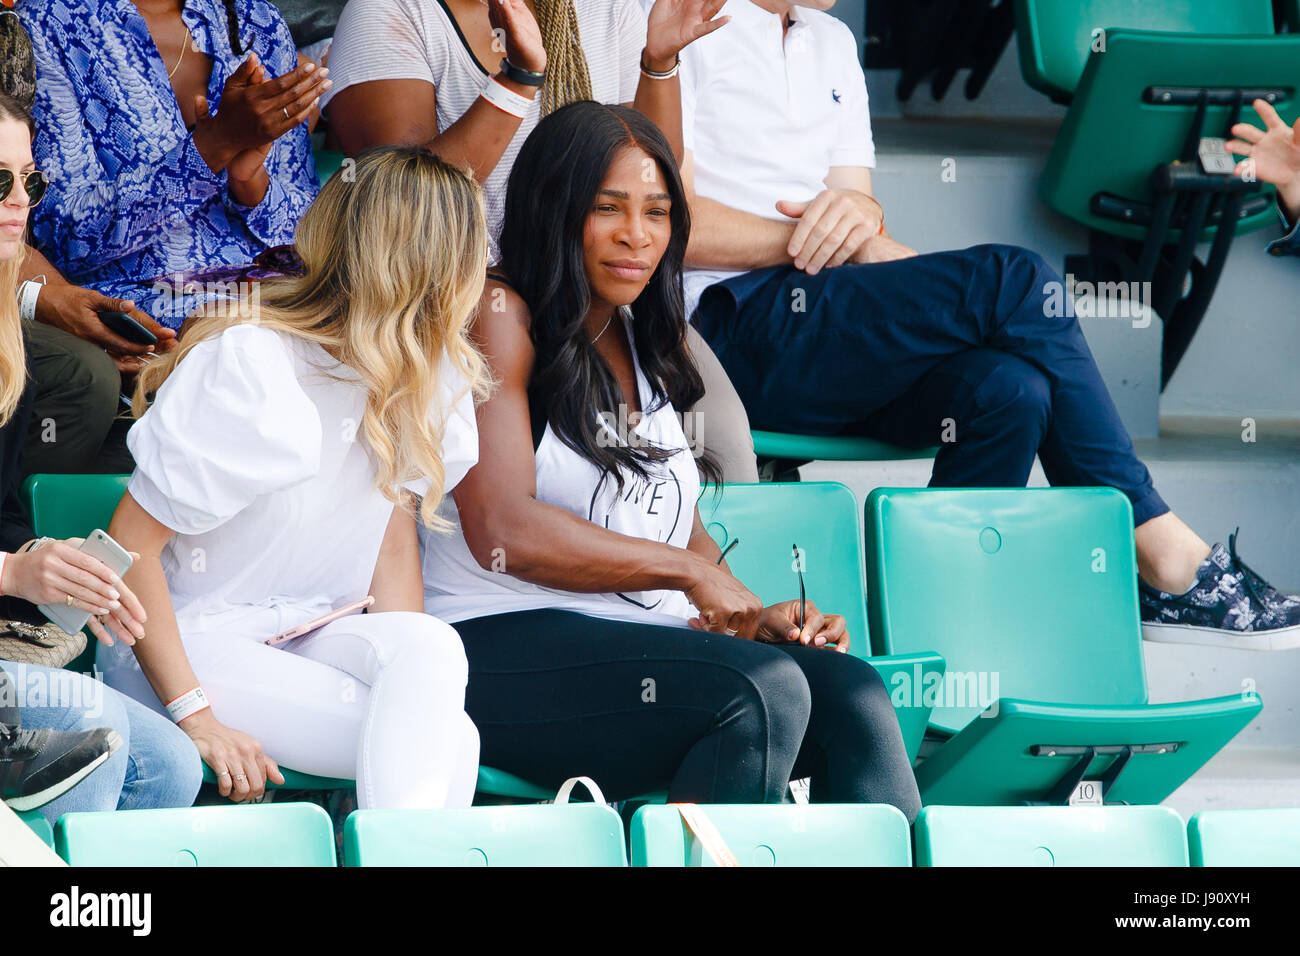 Paris, France, 31 May 2017: Pregnant Serena Williams during her sisters second round match at the 2017 Tennis French Open in Roland Garros Paris. Credit: Frank Molter/Alamy Live News Stock Photo